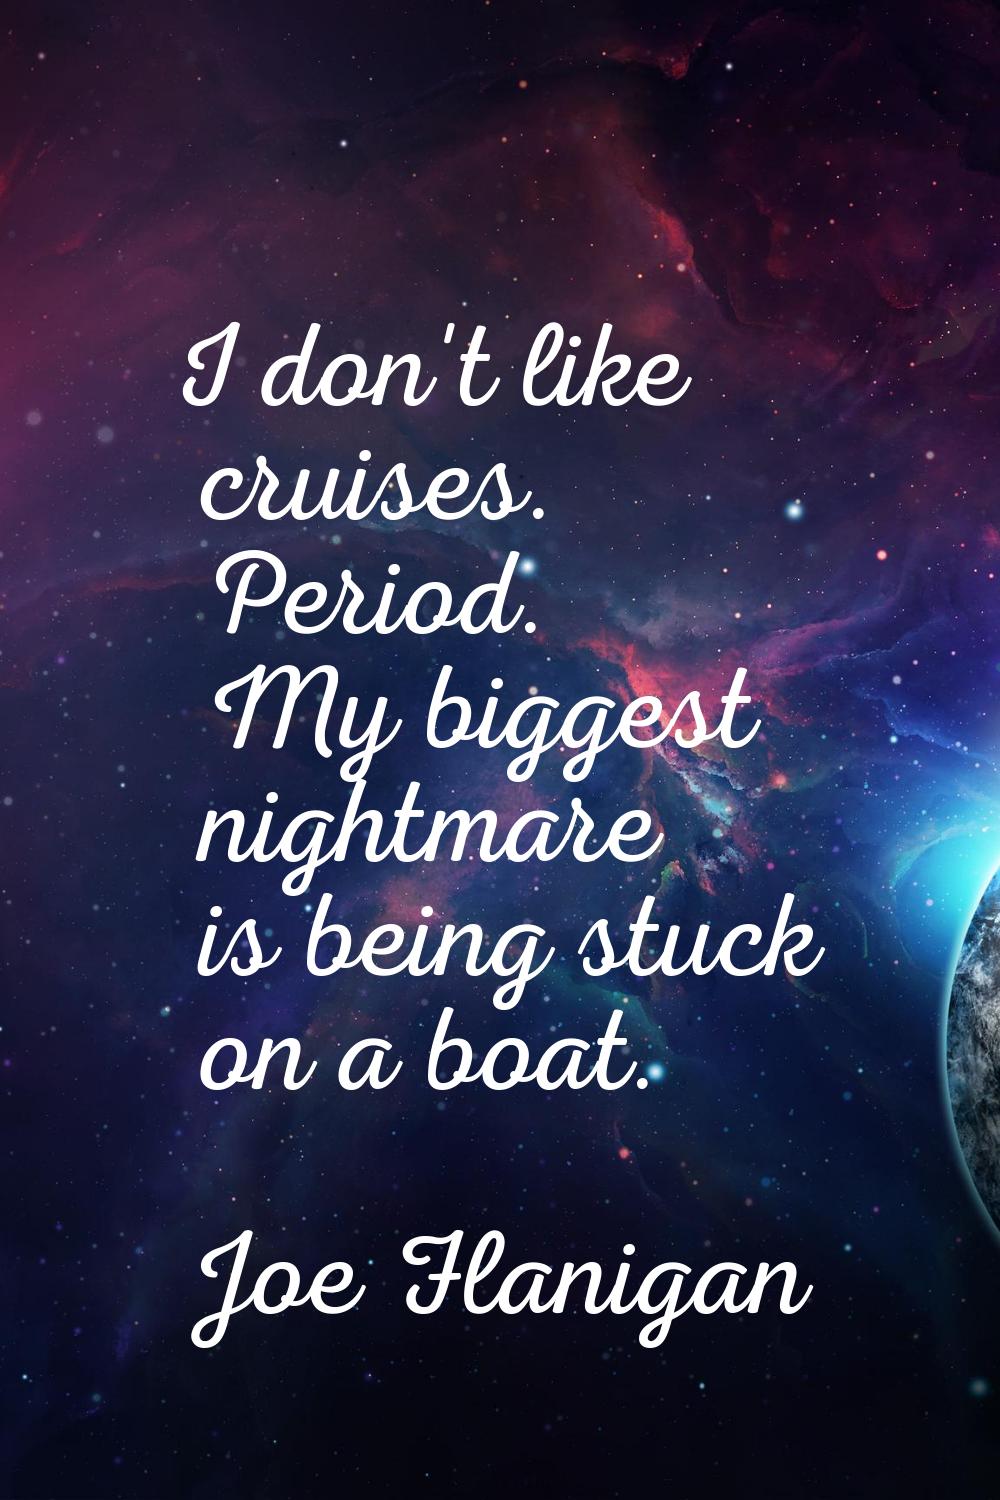 I don't like cruises. Period. My biggest nightmare is being stuck on a boat.